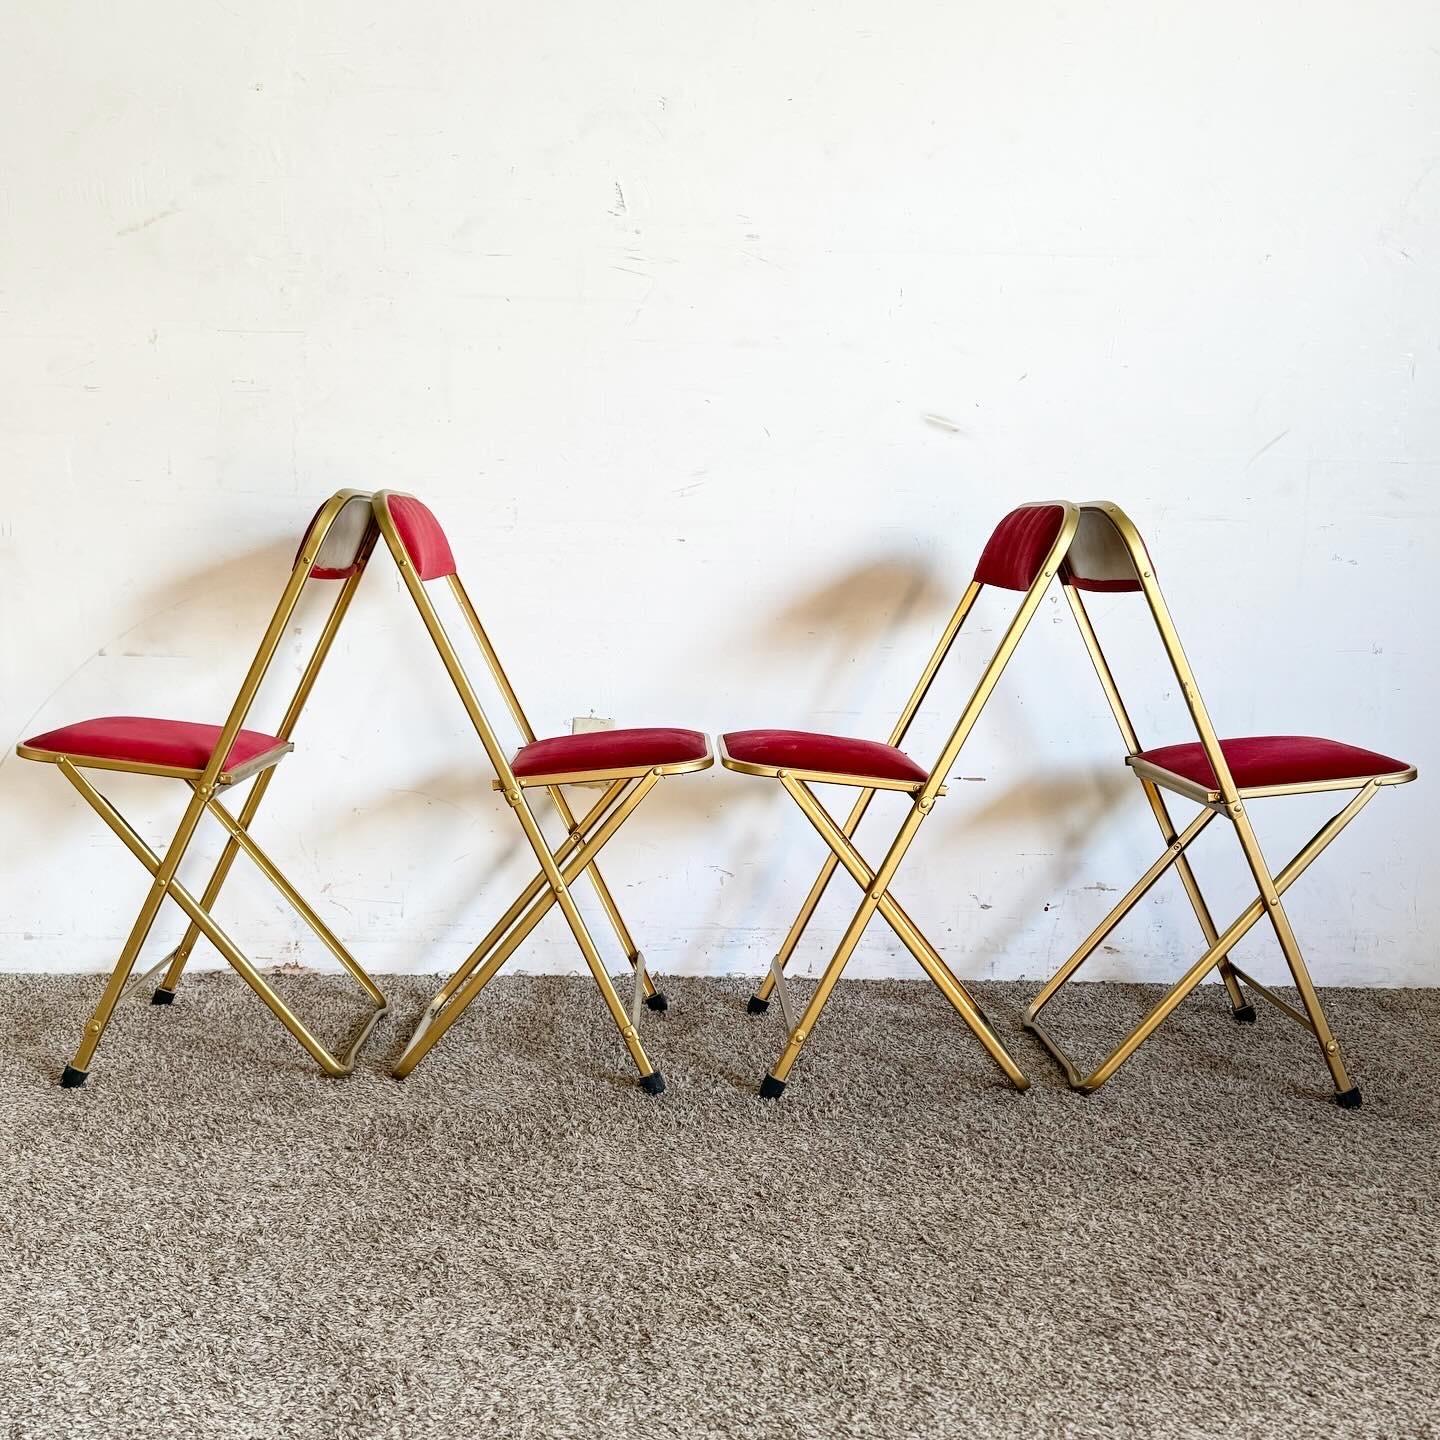 Vintage Gold and Red Folding Chairs by A. Fritz and Co - Set of 4 For Sale 1